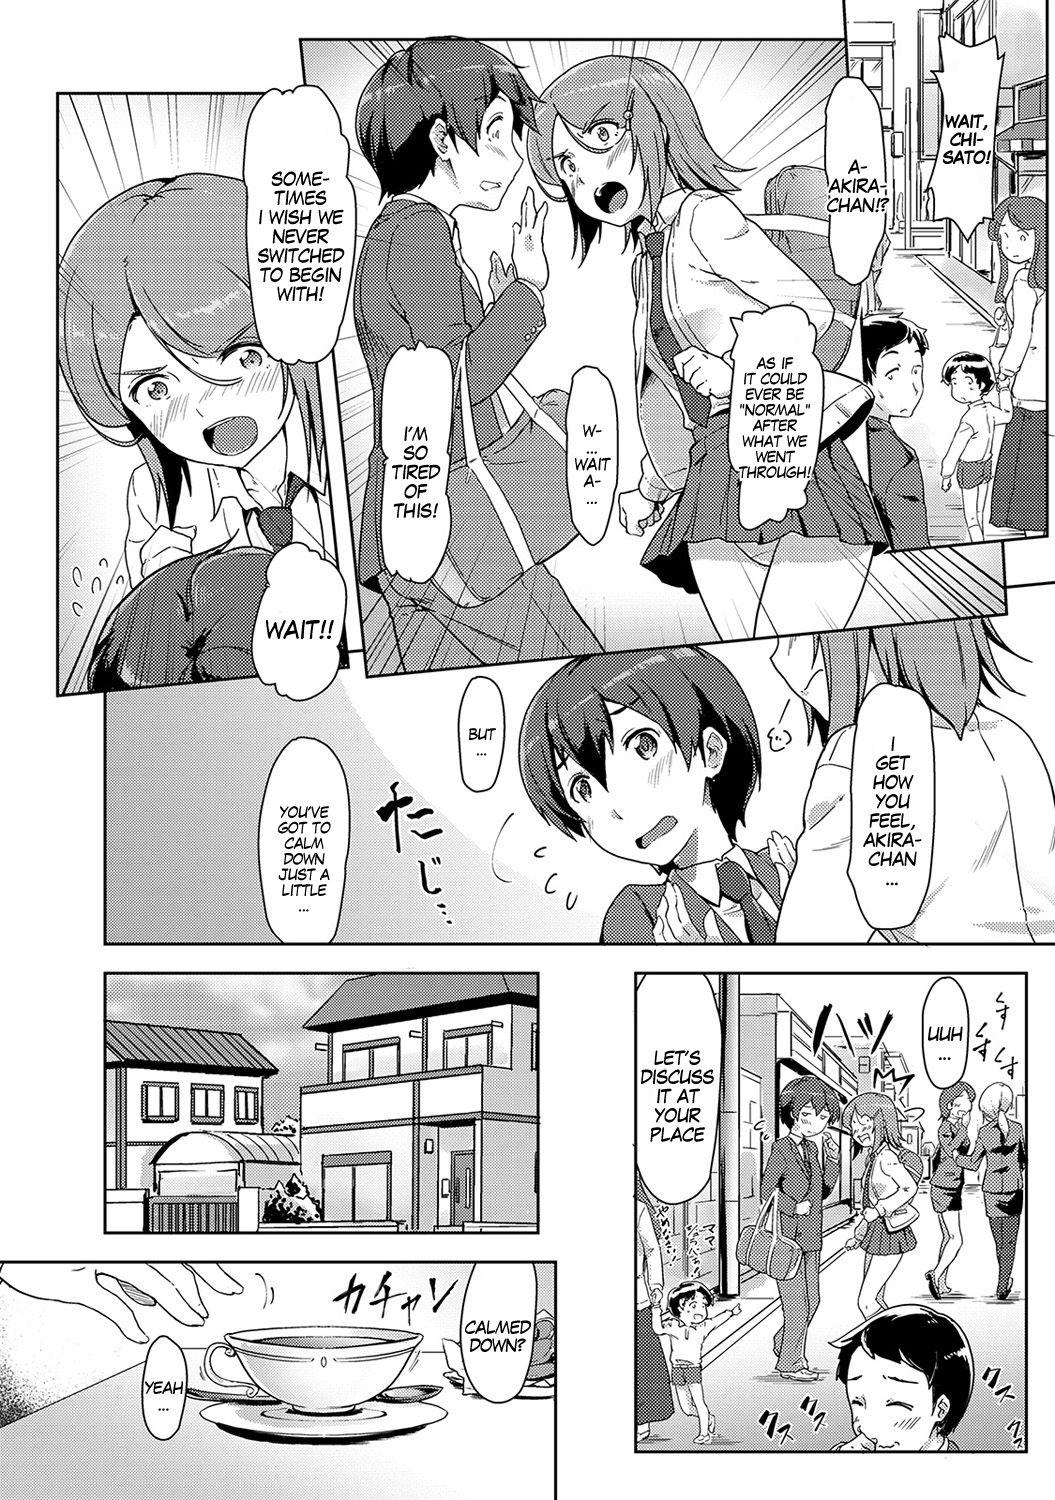 Couples Ecchi Shitara Irekawacchatta!? | We Switched Our Bodies After Having Sex!? Ch. 5 Negra - Page 1